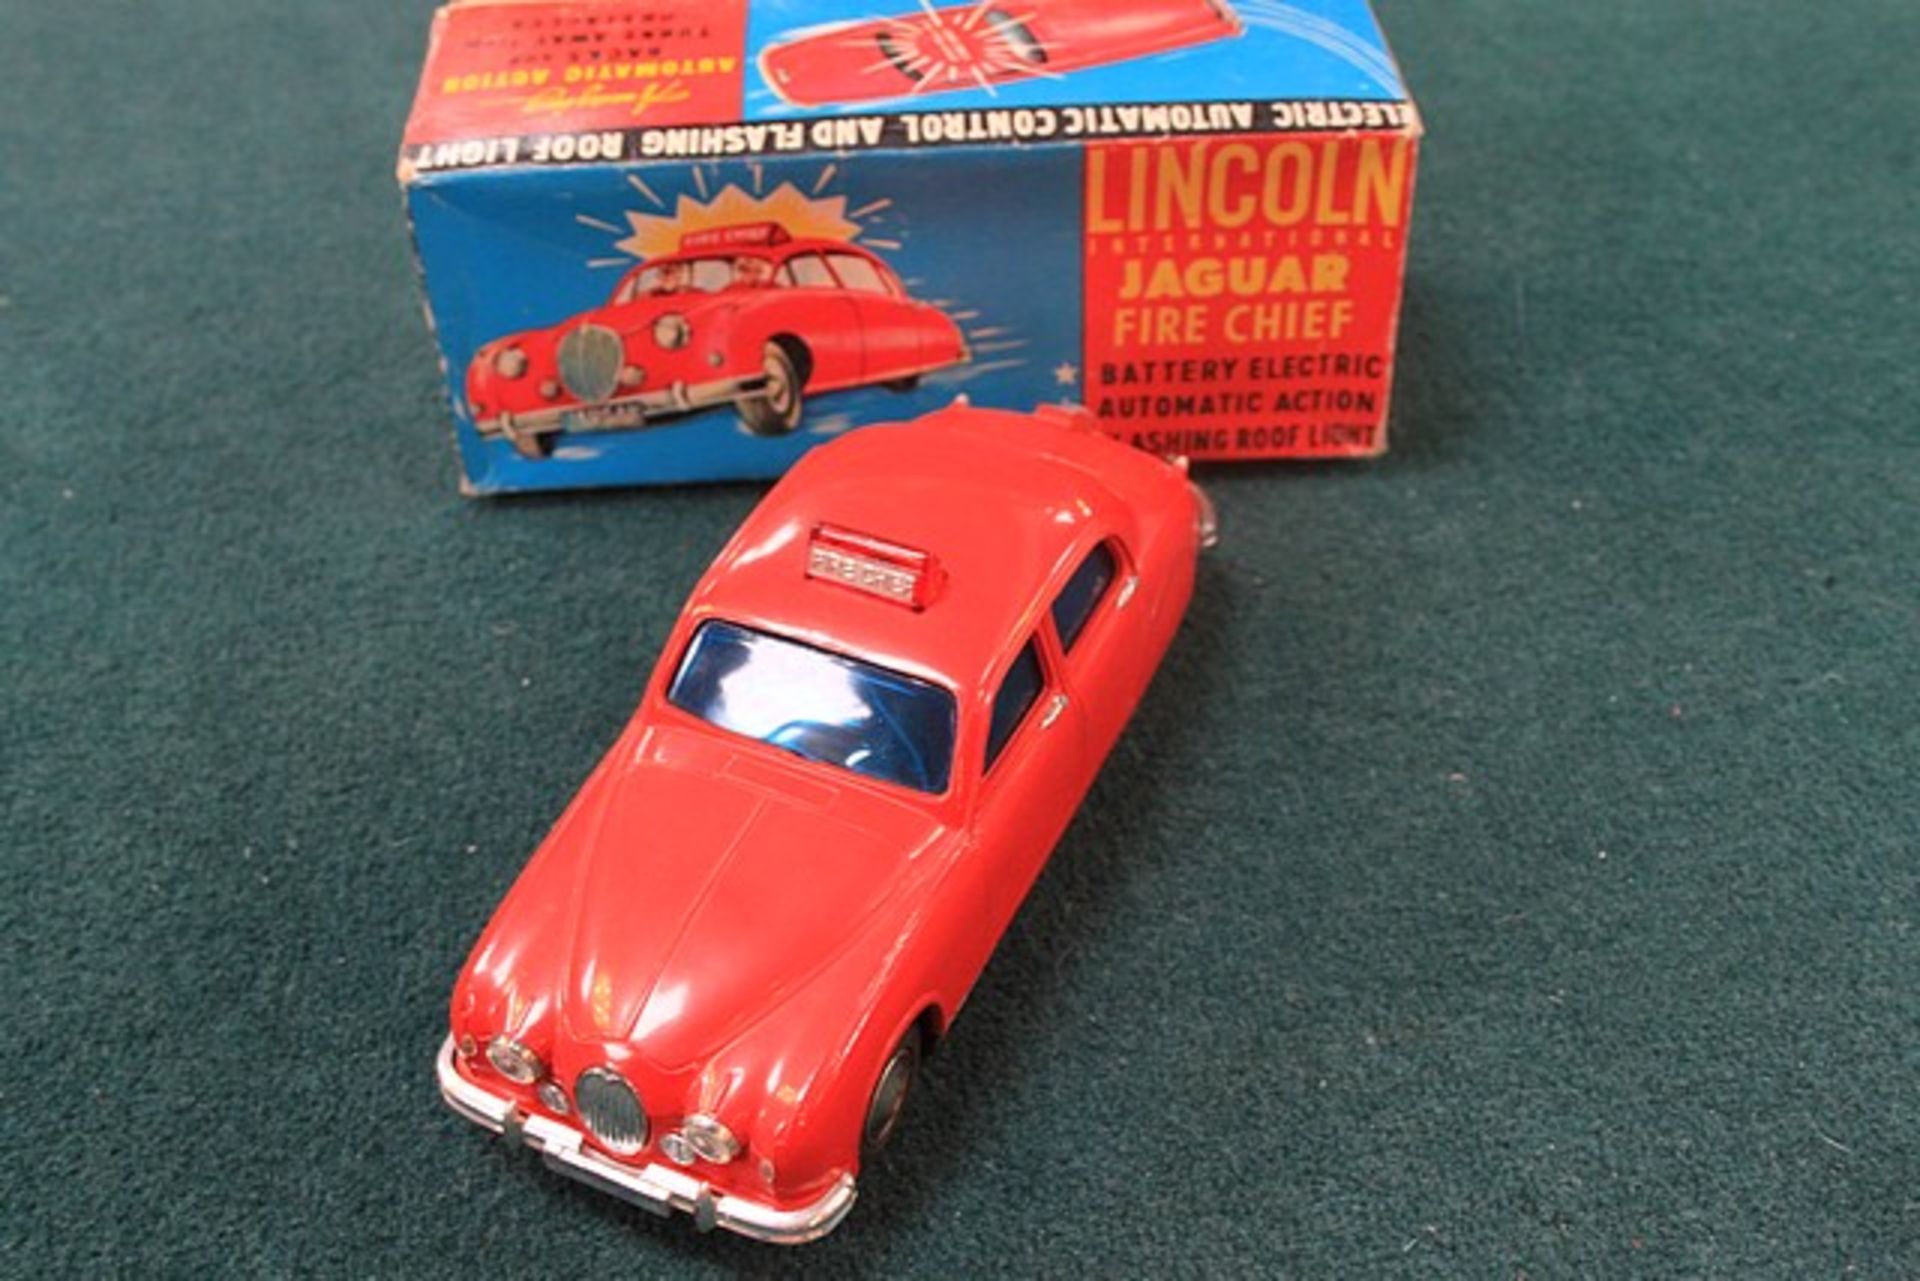 LINCOLN INTERNATIONAL 1960s BATTERY OPERATED JAGUAR FIRE CHIEF CAR IN THE ORIGINAL BOX 8 1/2" L - Image 3 of 3